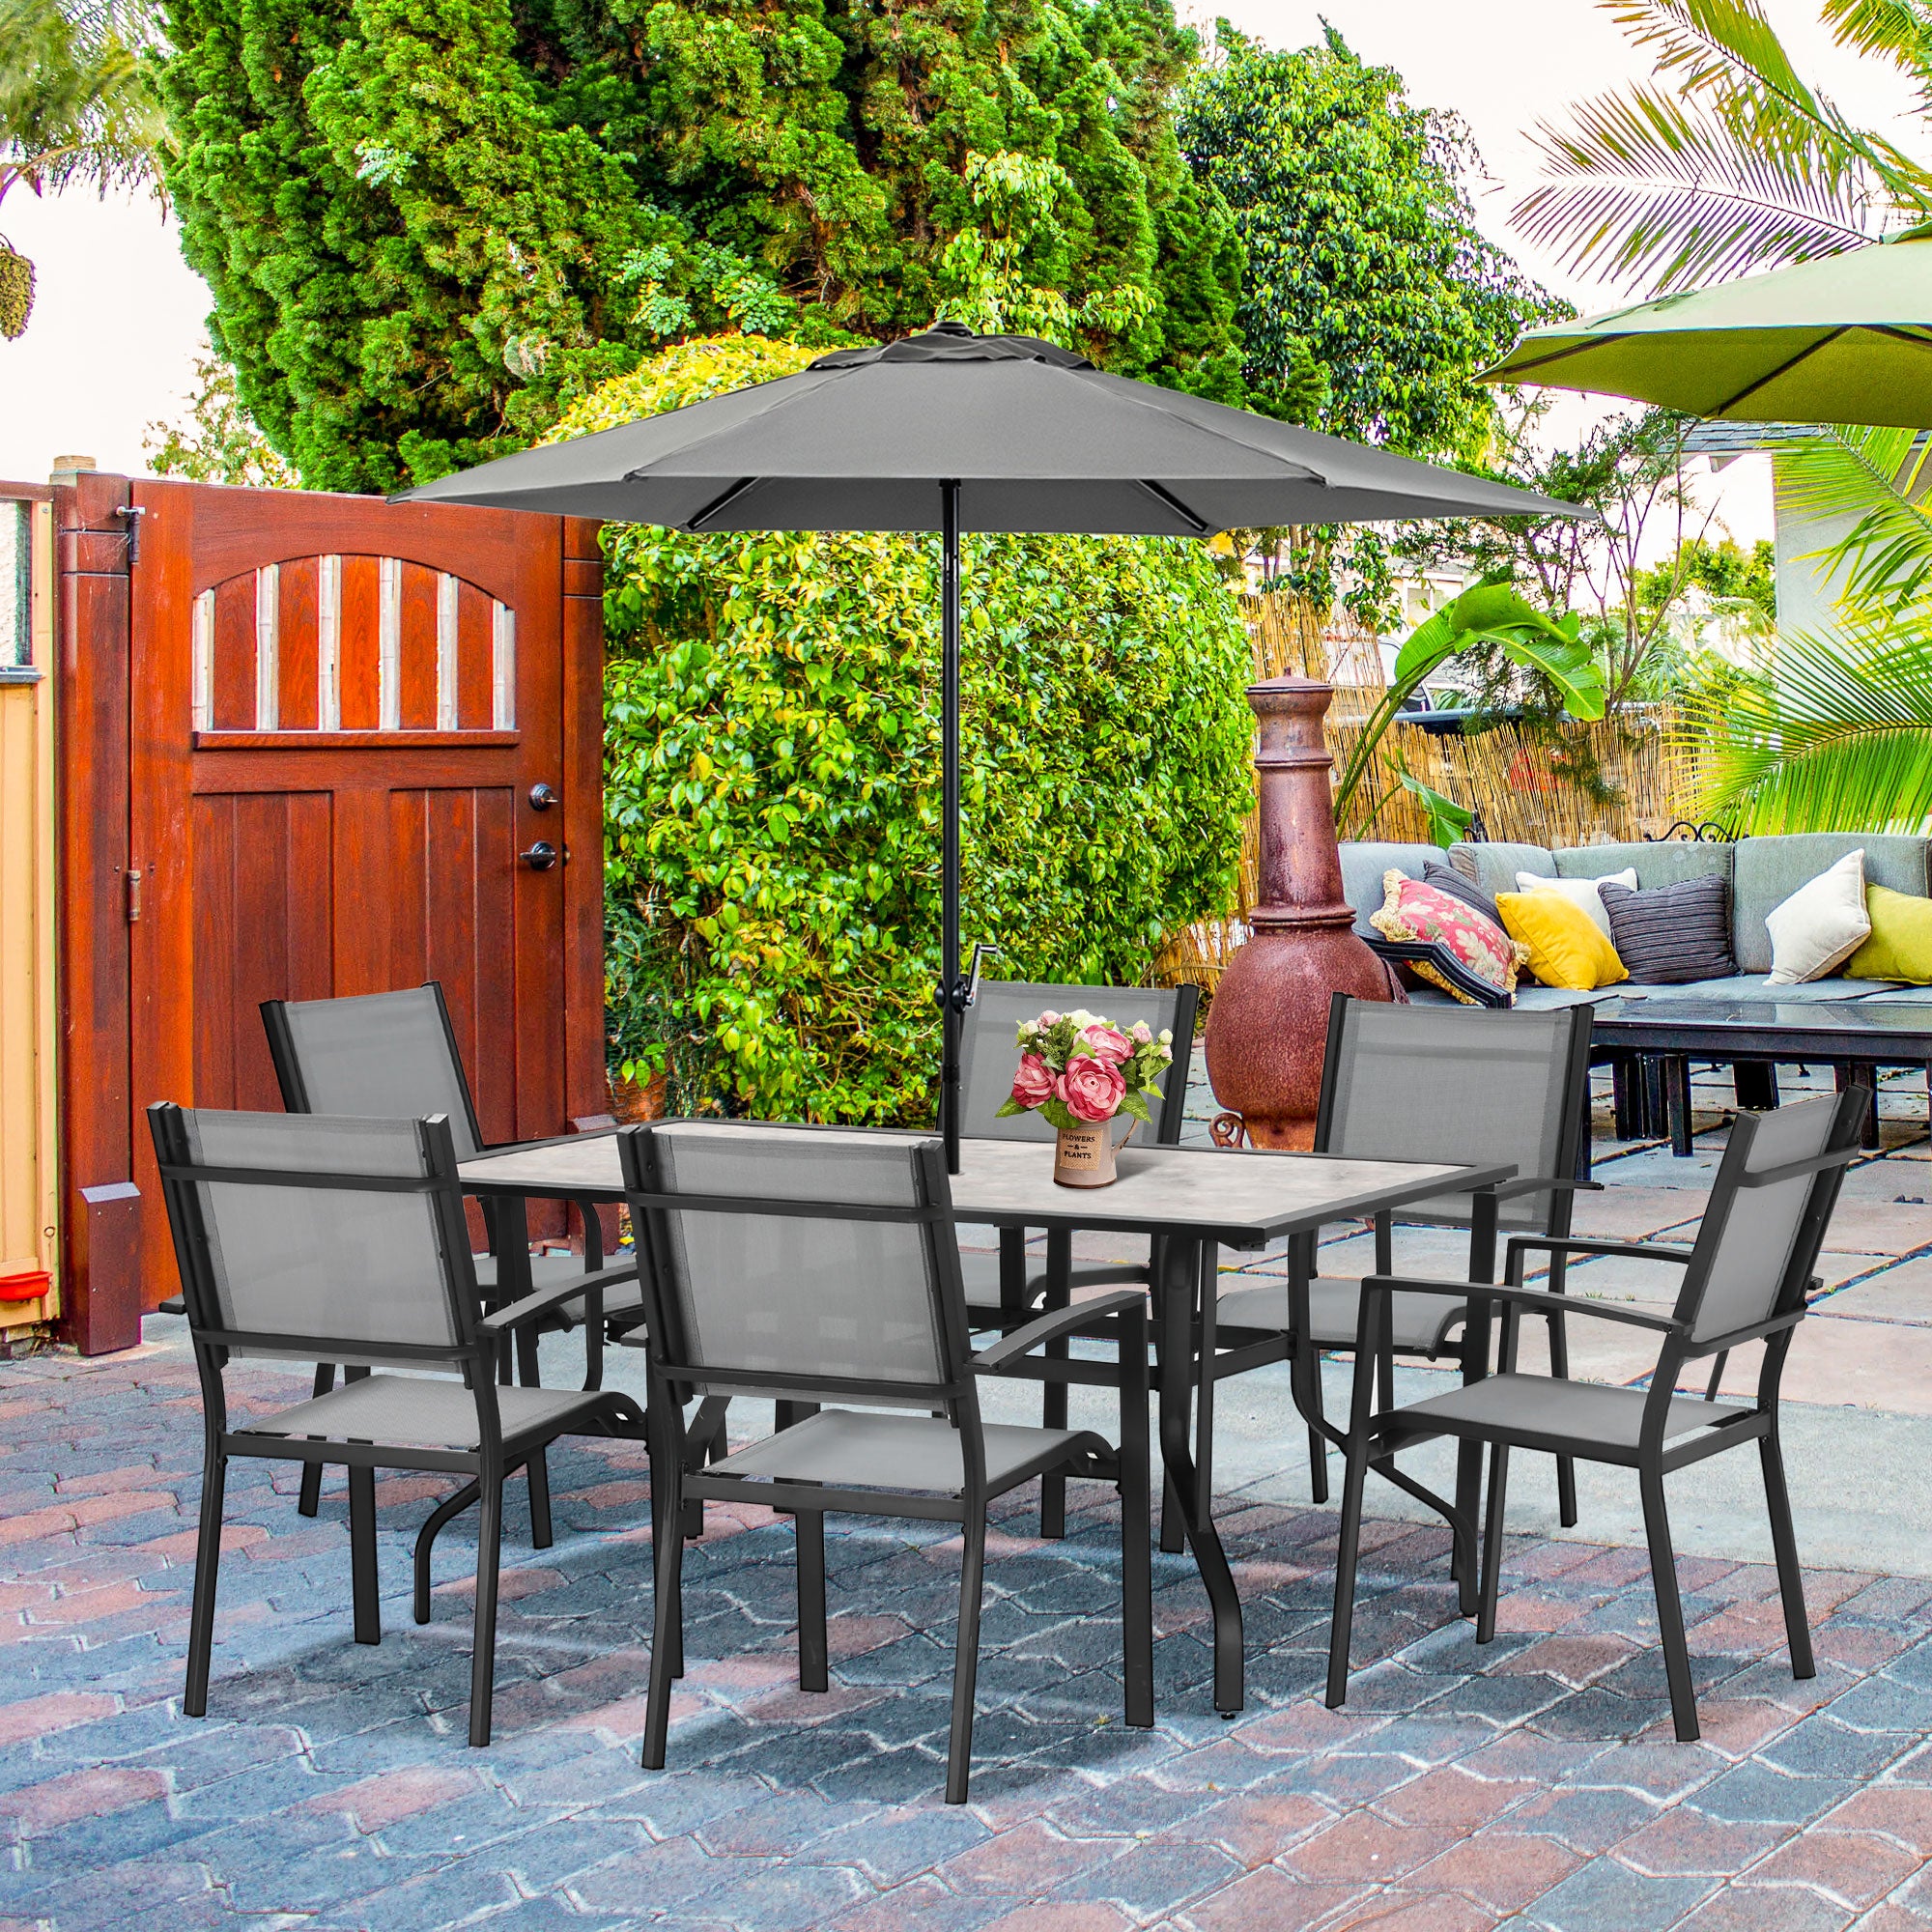 Outsunny 7 Piece Garden Dining Set, Armchairs and Table with Parasol Hole, 6 Seater Outdoor Patio Furniture with Texteline Seat for Backyard, Grey - Inspirely